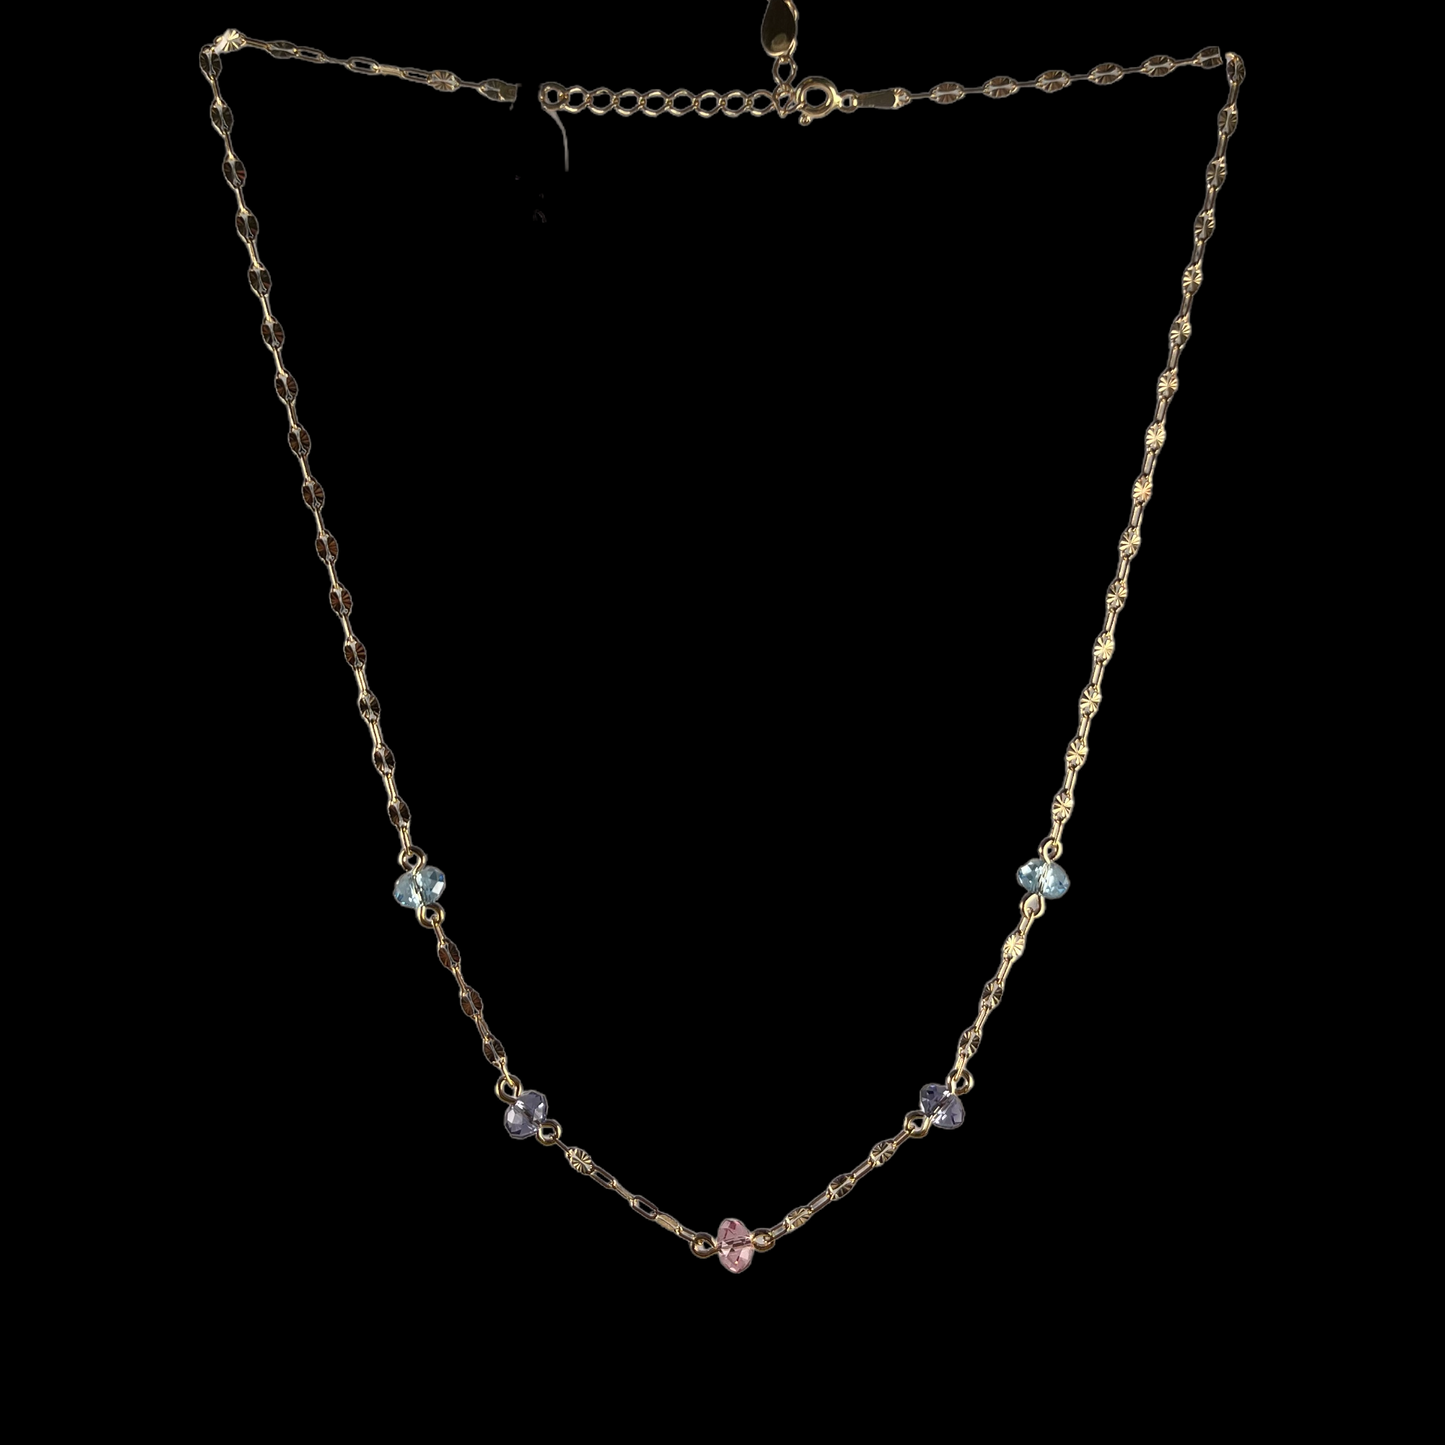 Necklace with Swarovski crystals, ELLA collection, J252, gold-plated silver